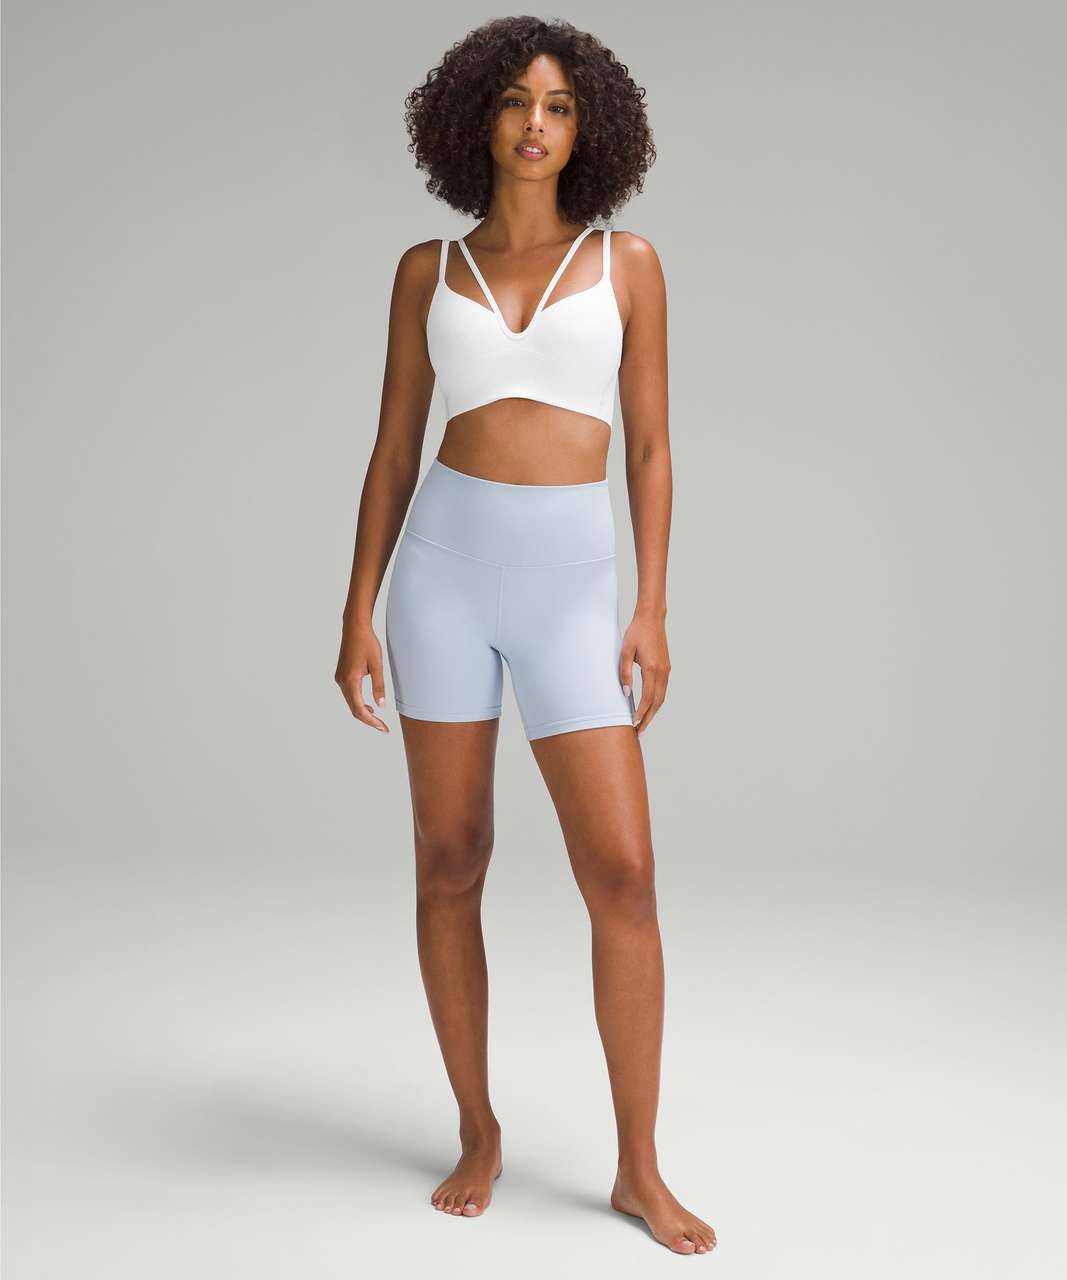 Lululemon Like a Cloud Strappy Longline Ribbed Bra *Light Support, B/C Cup - White